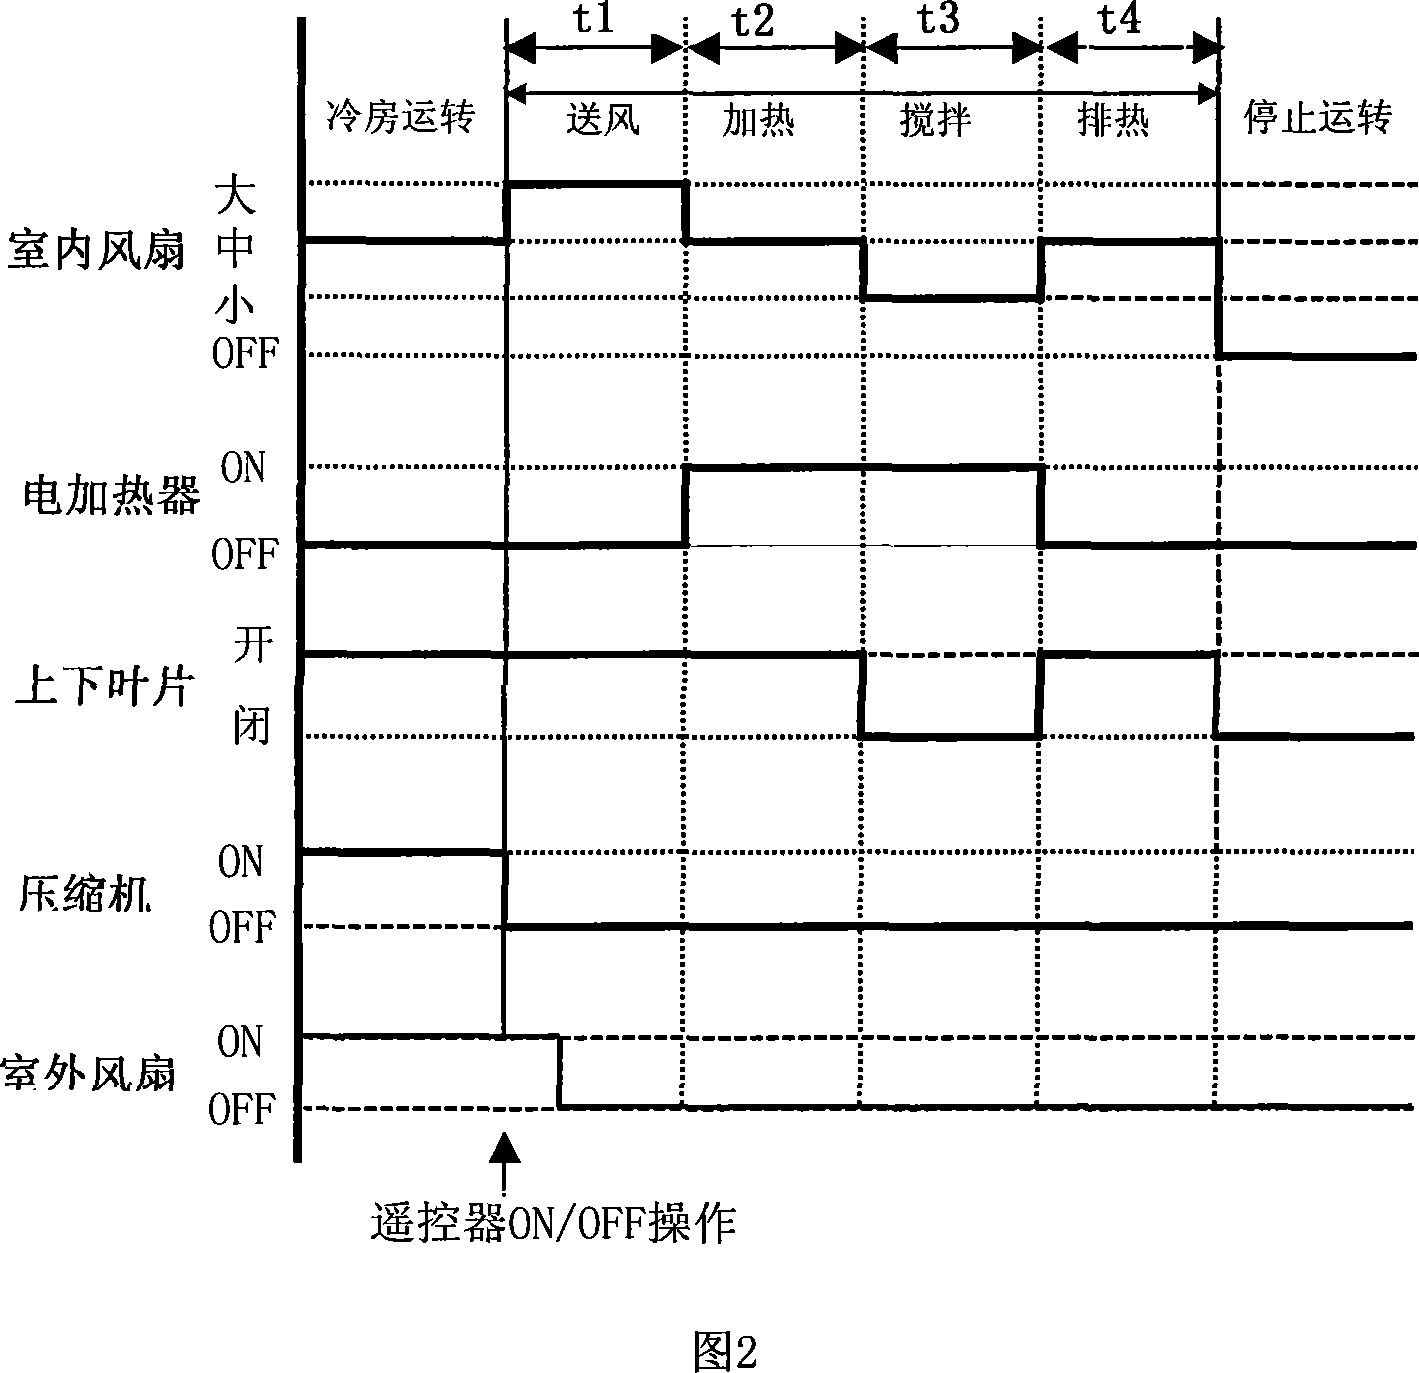 Control method of air-conditioning